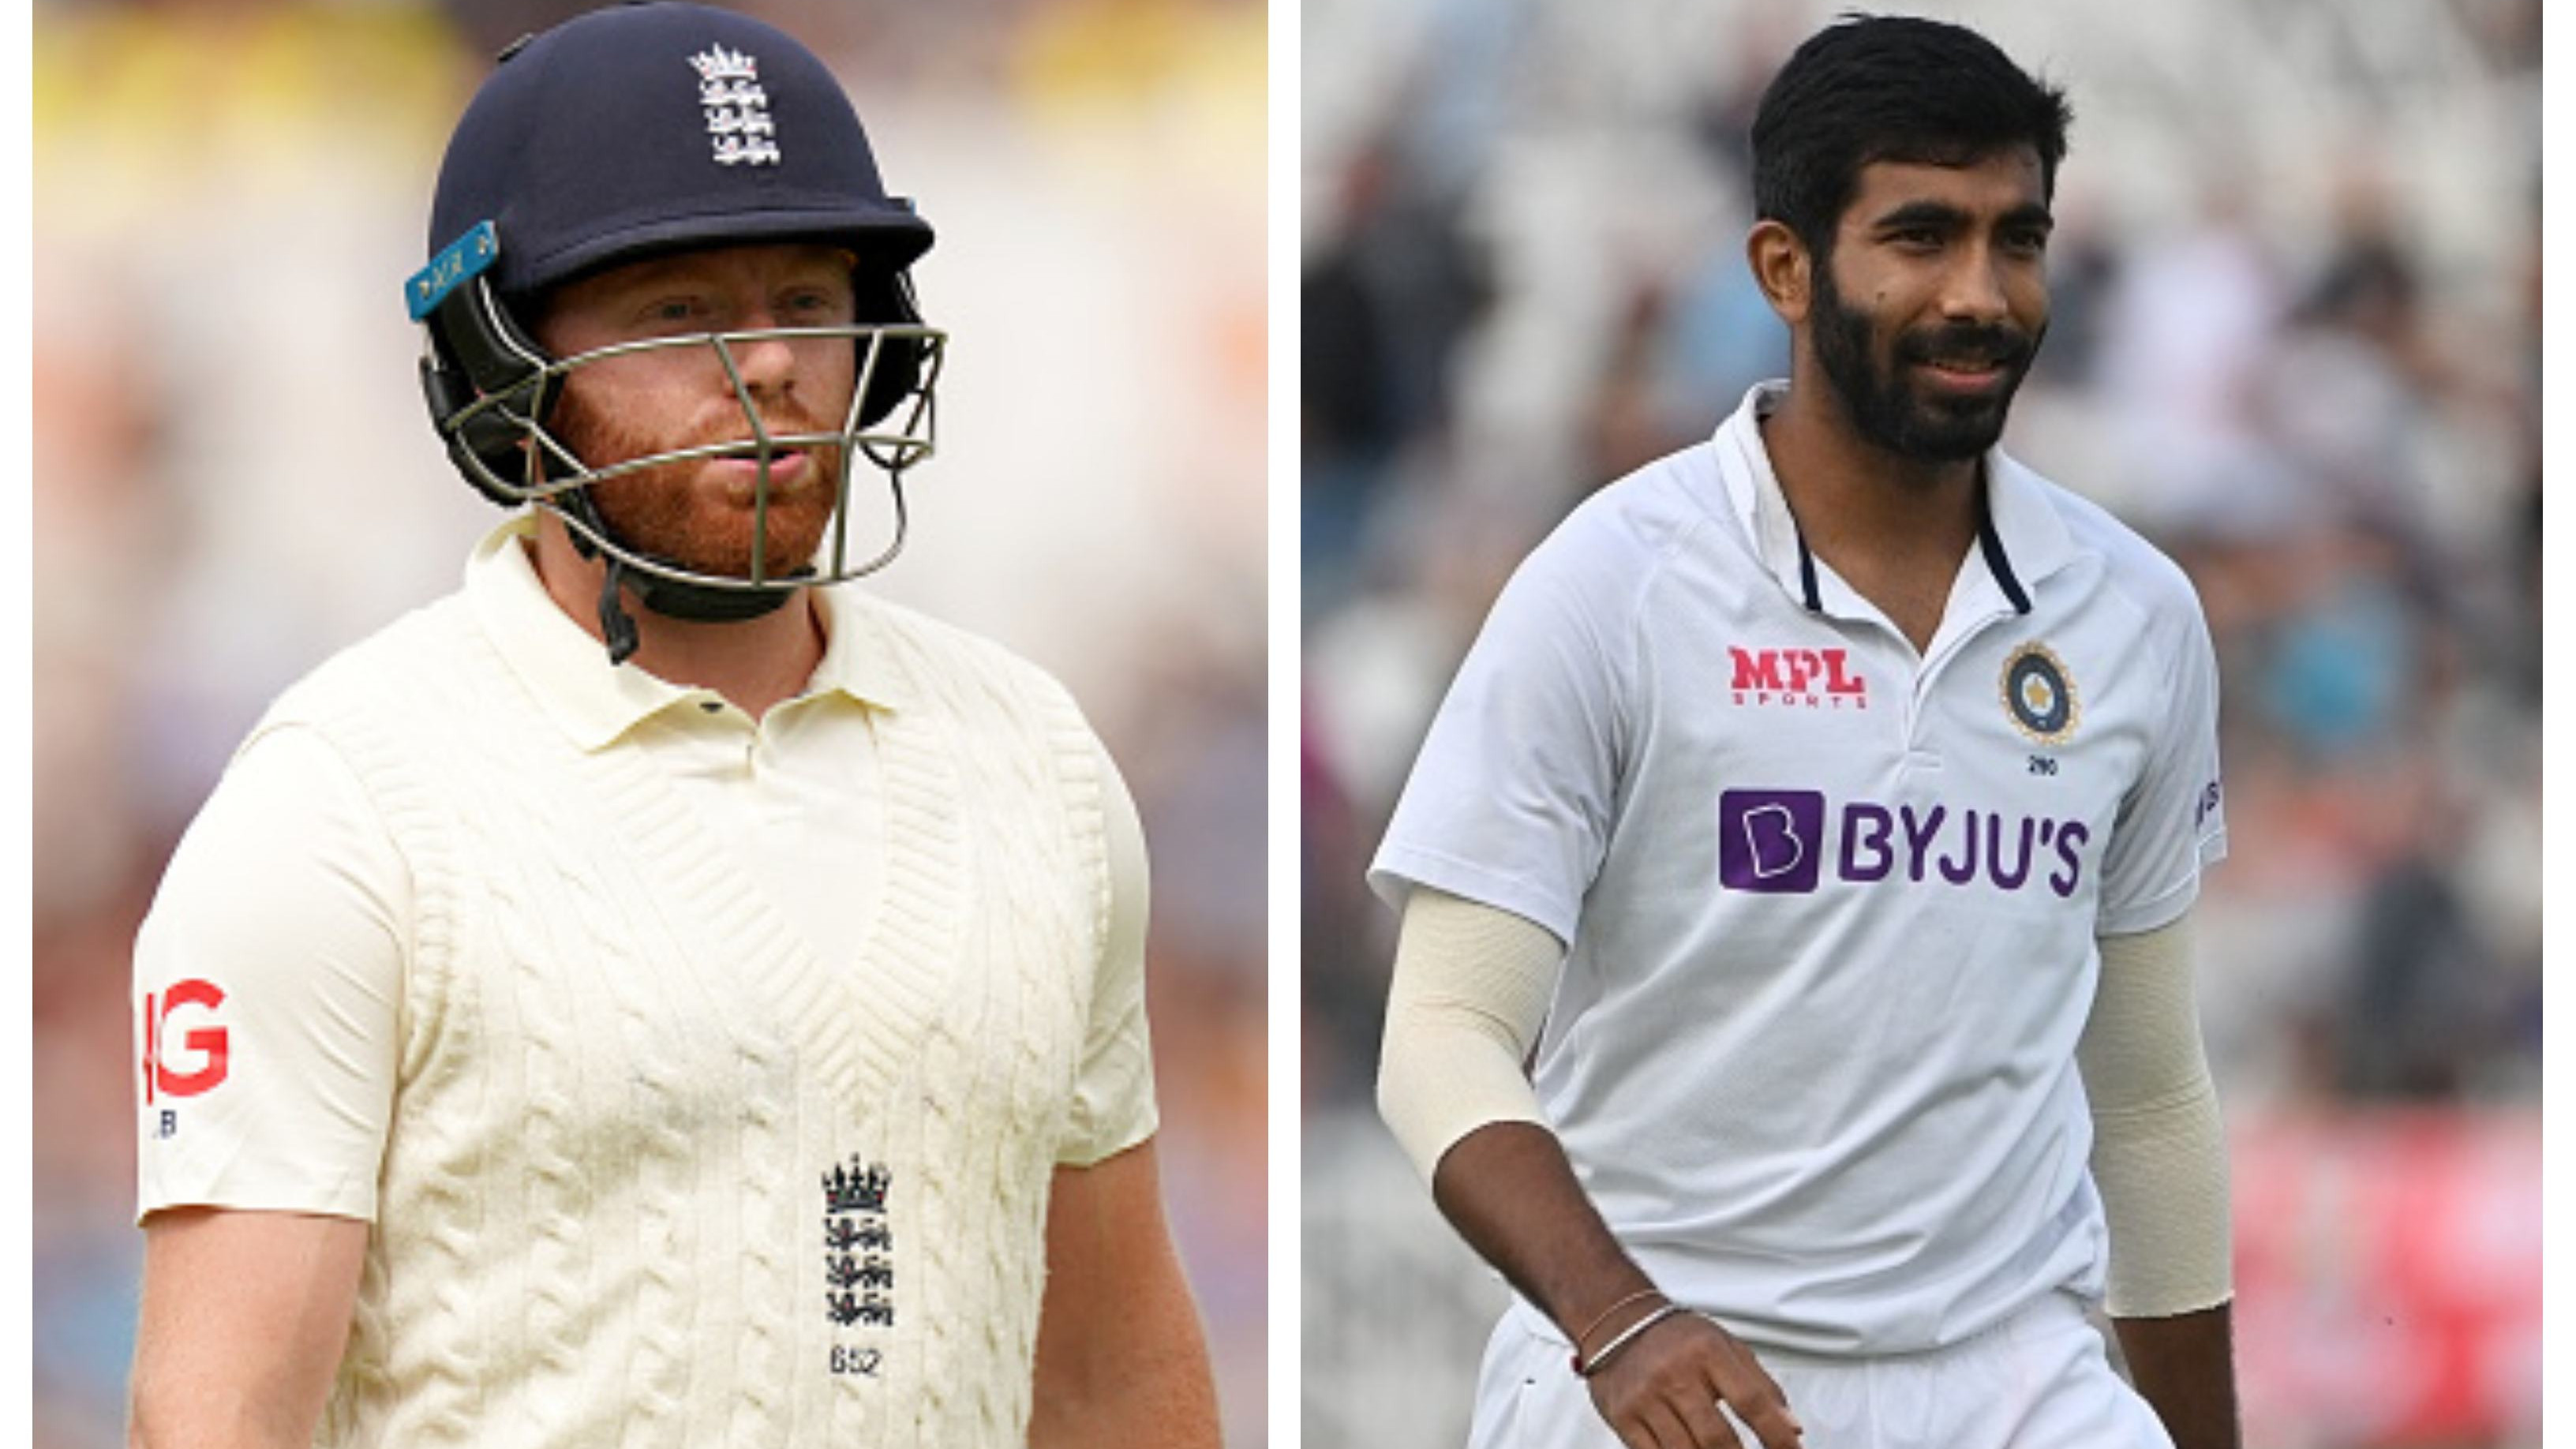 ENG v IND 2021: Bairstow hails world class bowler Bumrah; says he has got amazing skills for all three formats